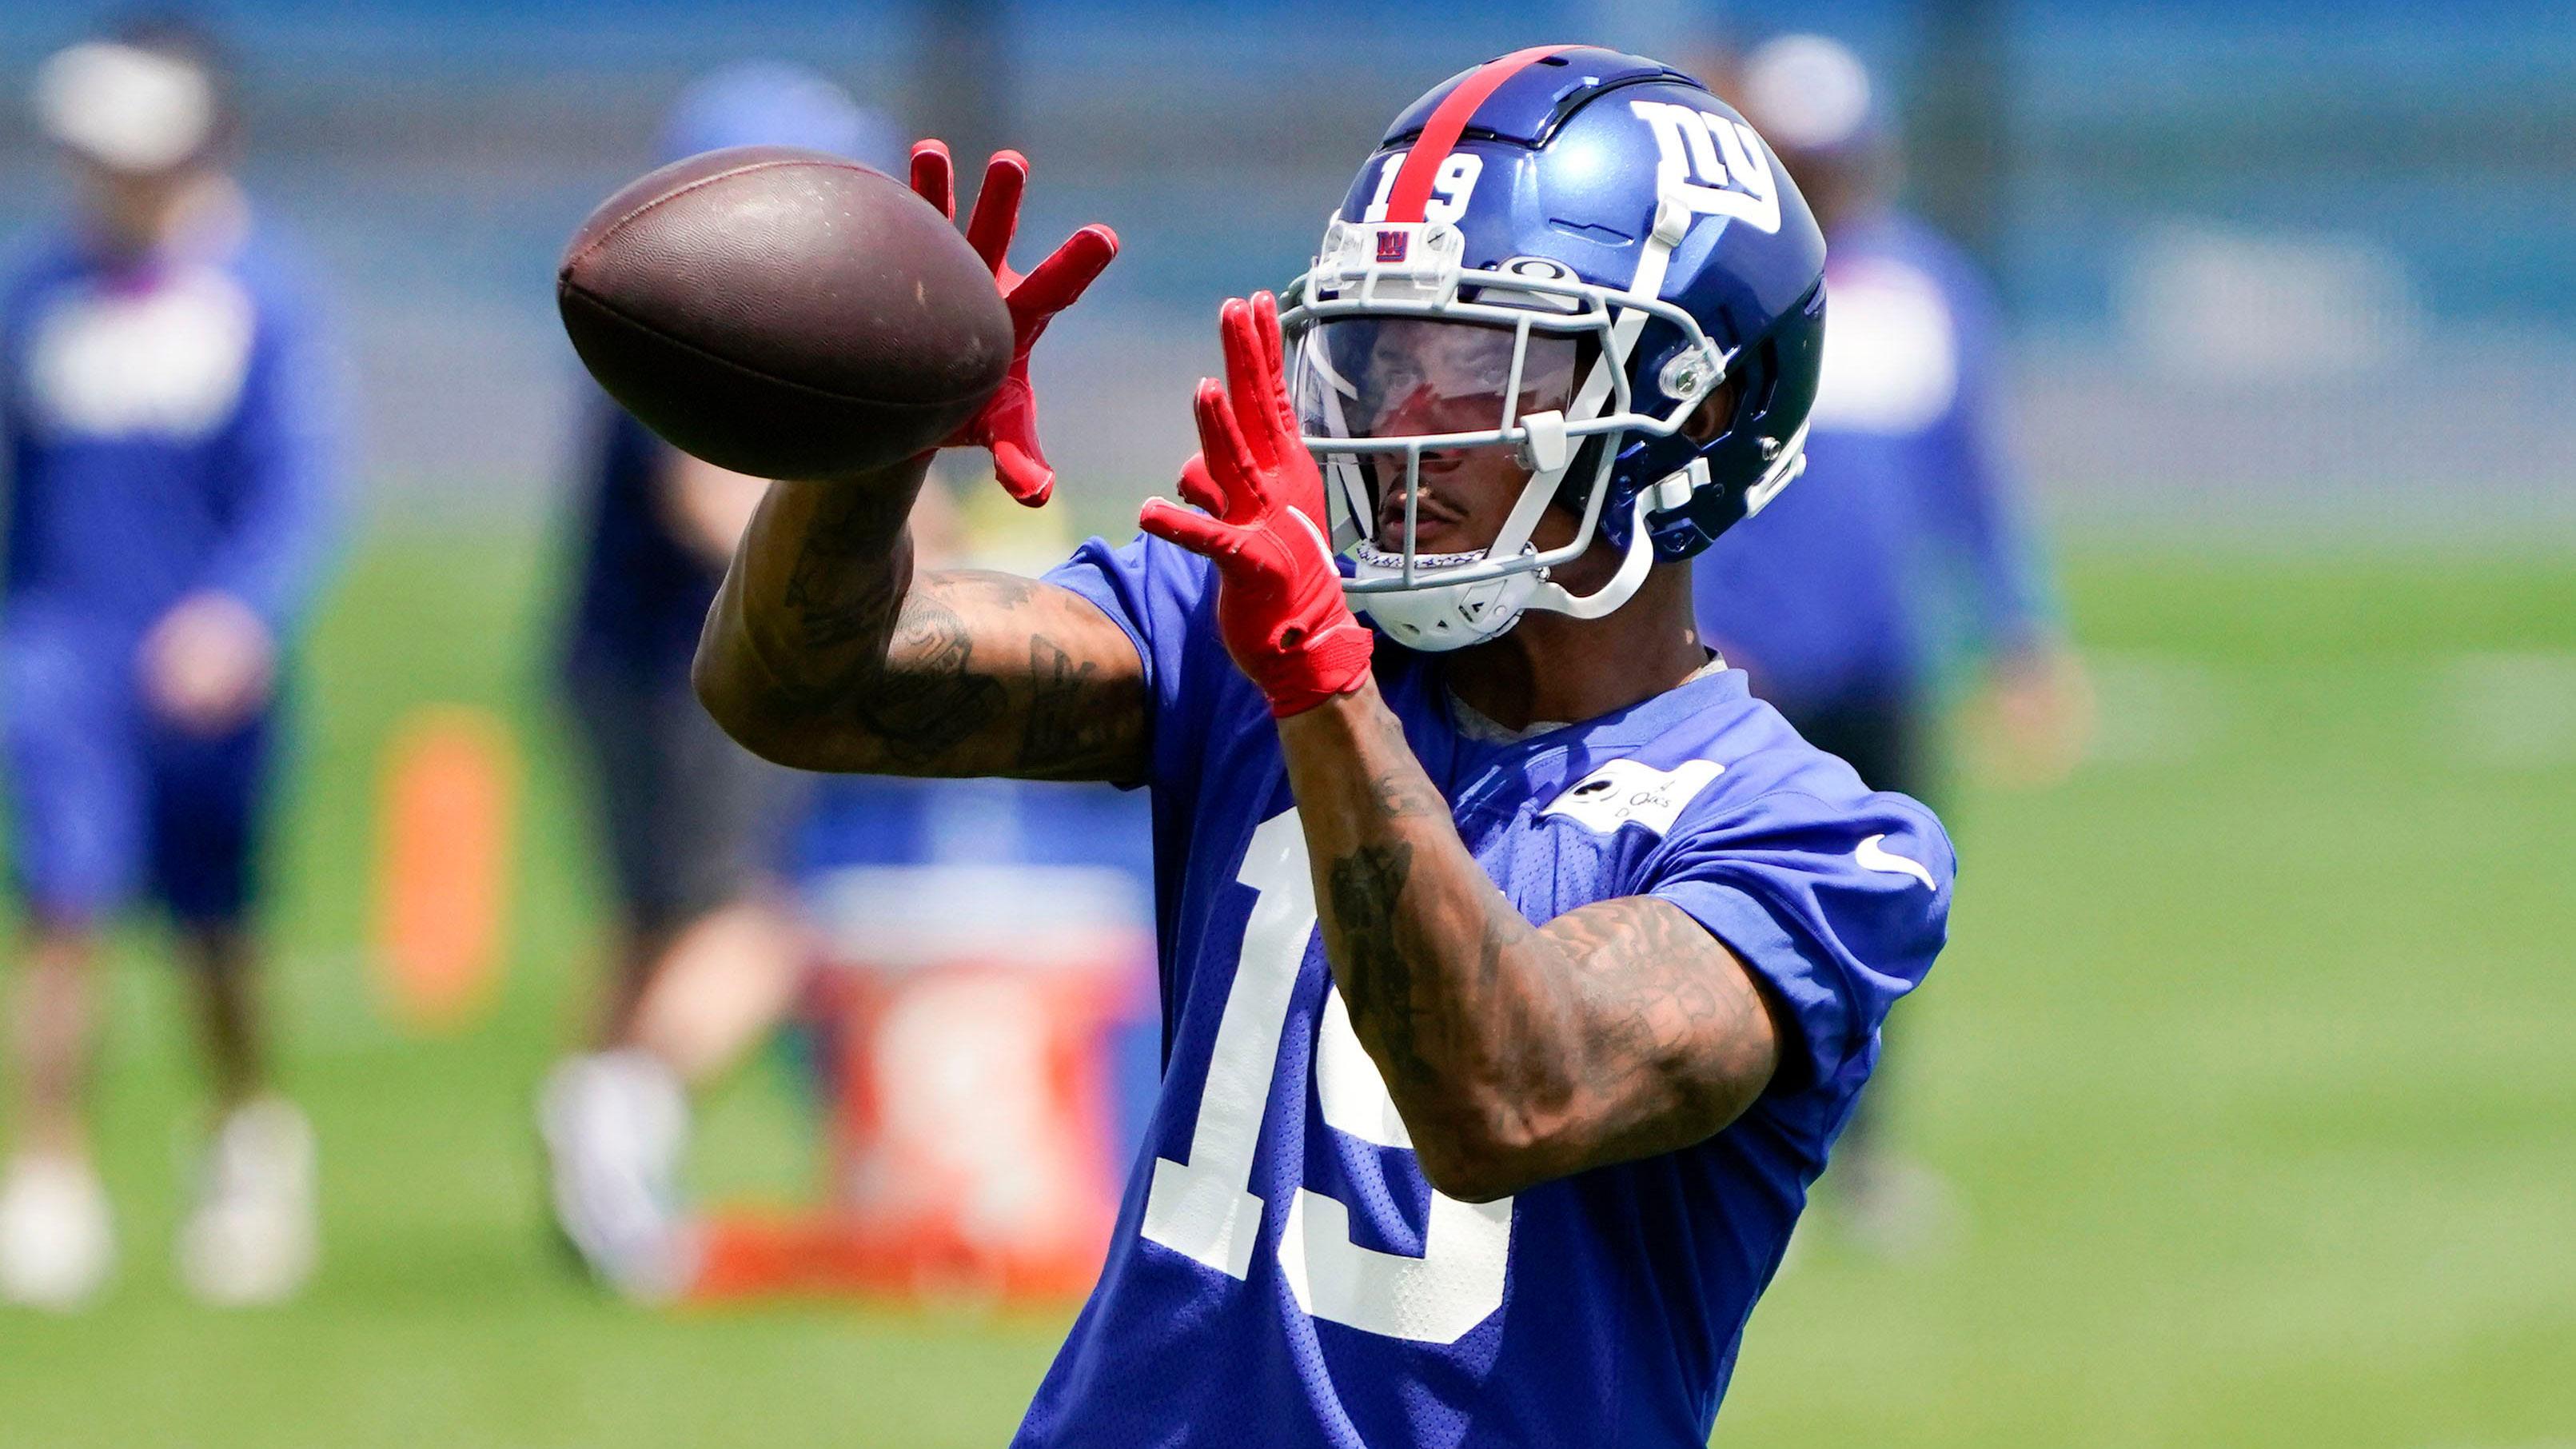 New York Giants wide receiver Kenny Golladay (19) catches the ball during the last day of mandatory minicamp at Quest Diagnostics Training Center on Thursday, June 10, 2021, in East Rutherford. / Danielle Parhizkaran/NorthJersey.com via Imagn Content Services, LLC